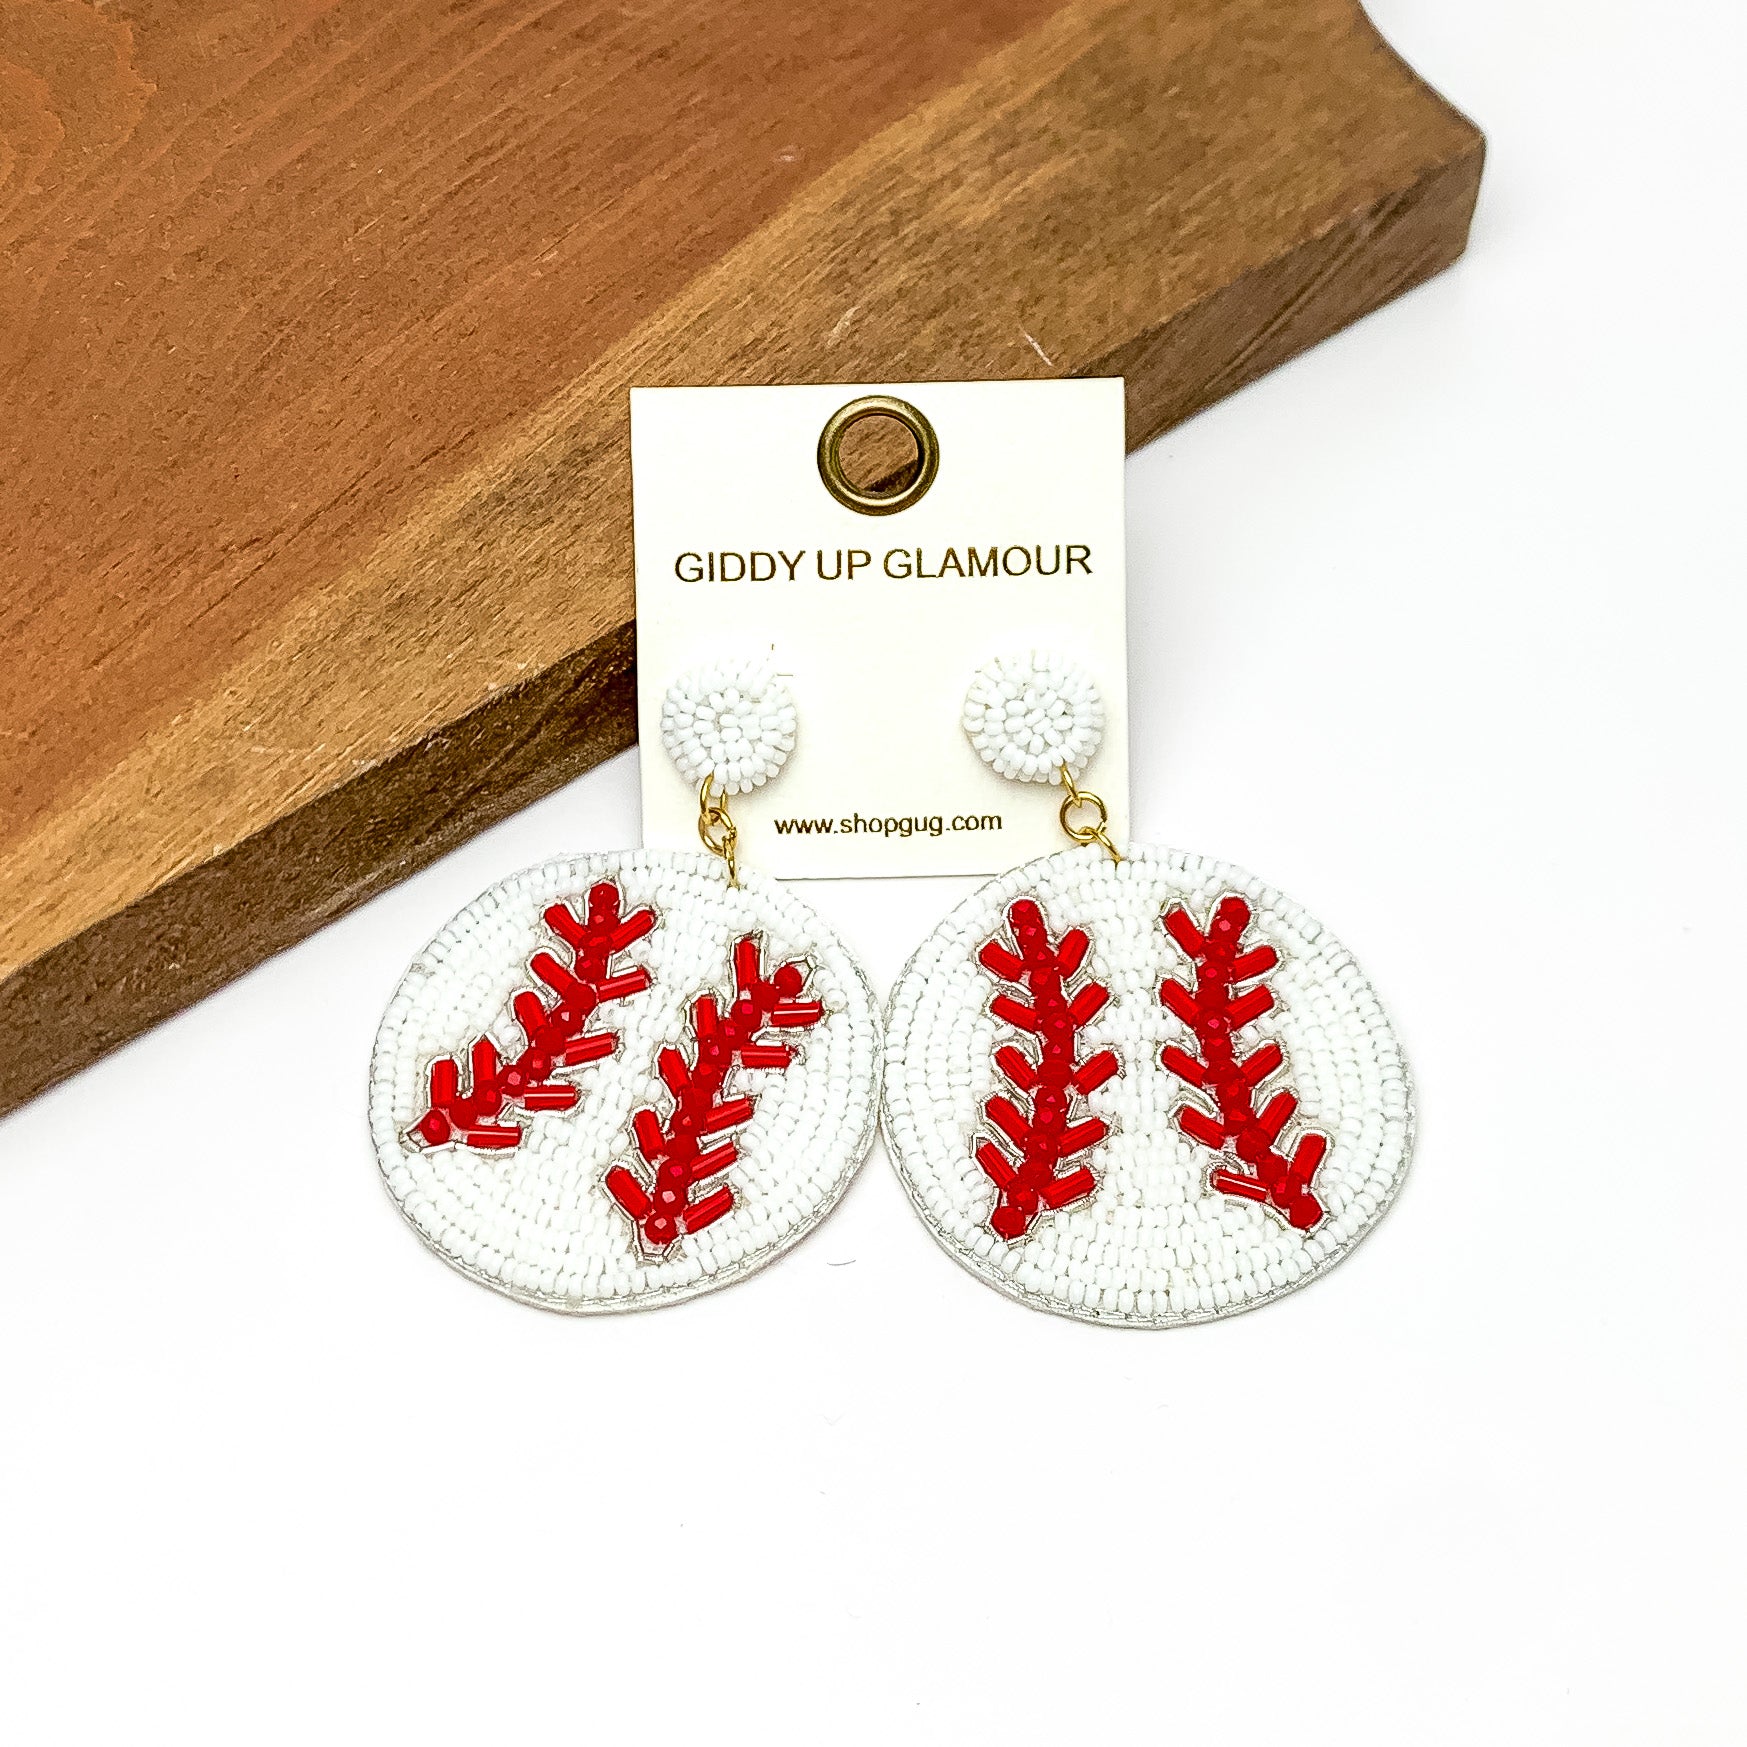 Baseball Circular Beaded Earrings in White and Red. Pictured on a white background with the earrings against a wood piece.